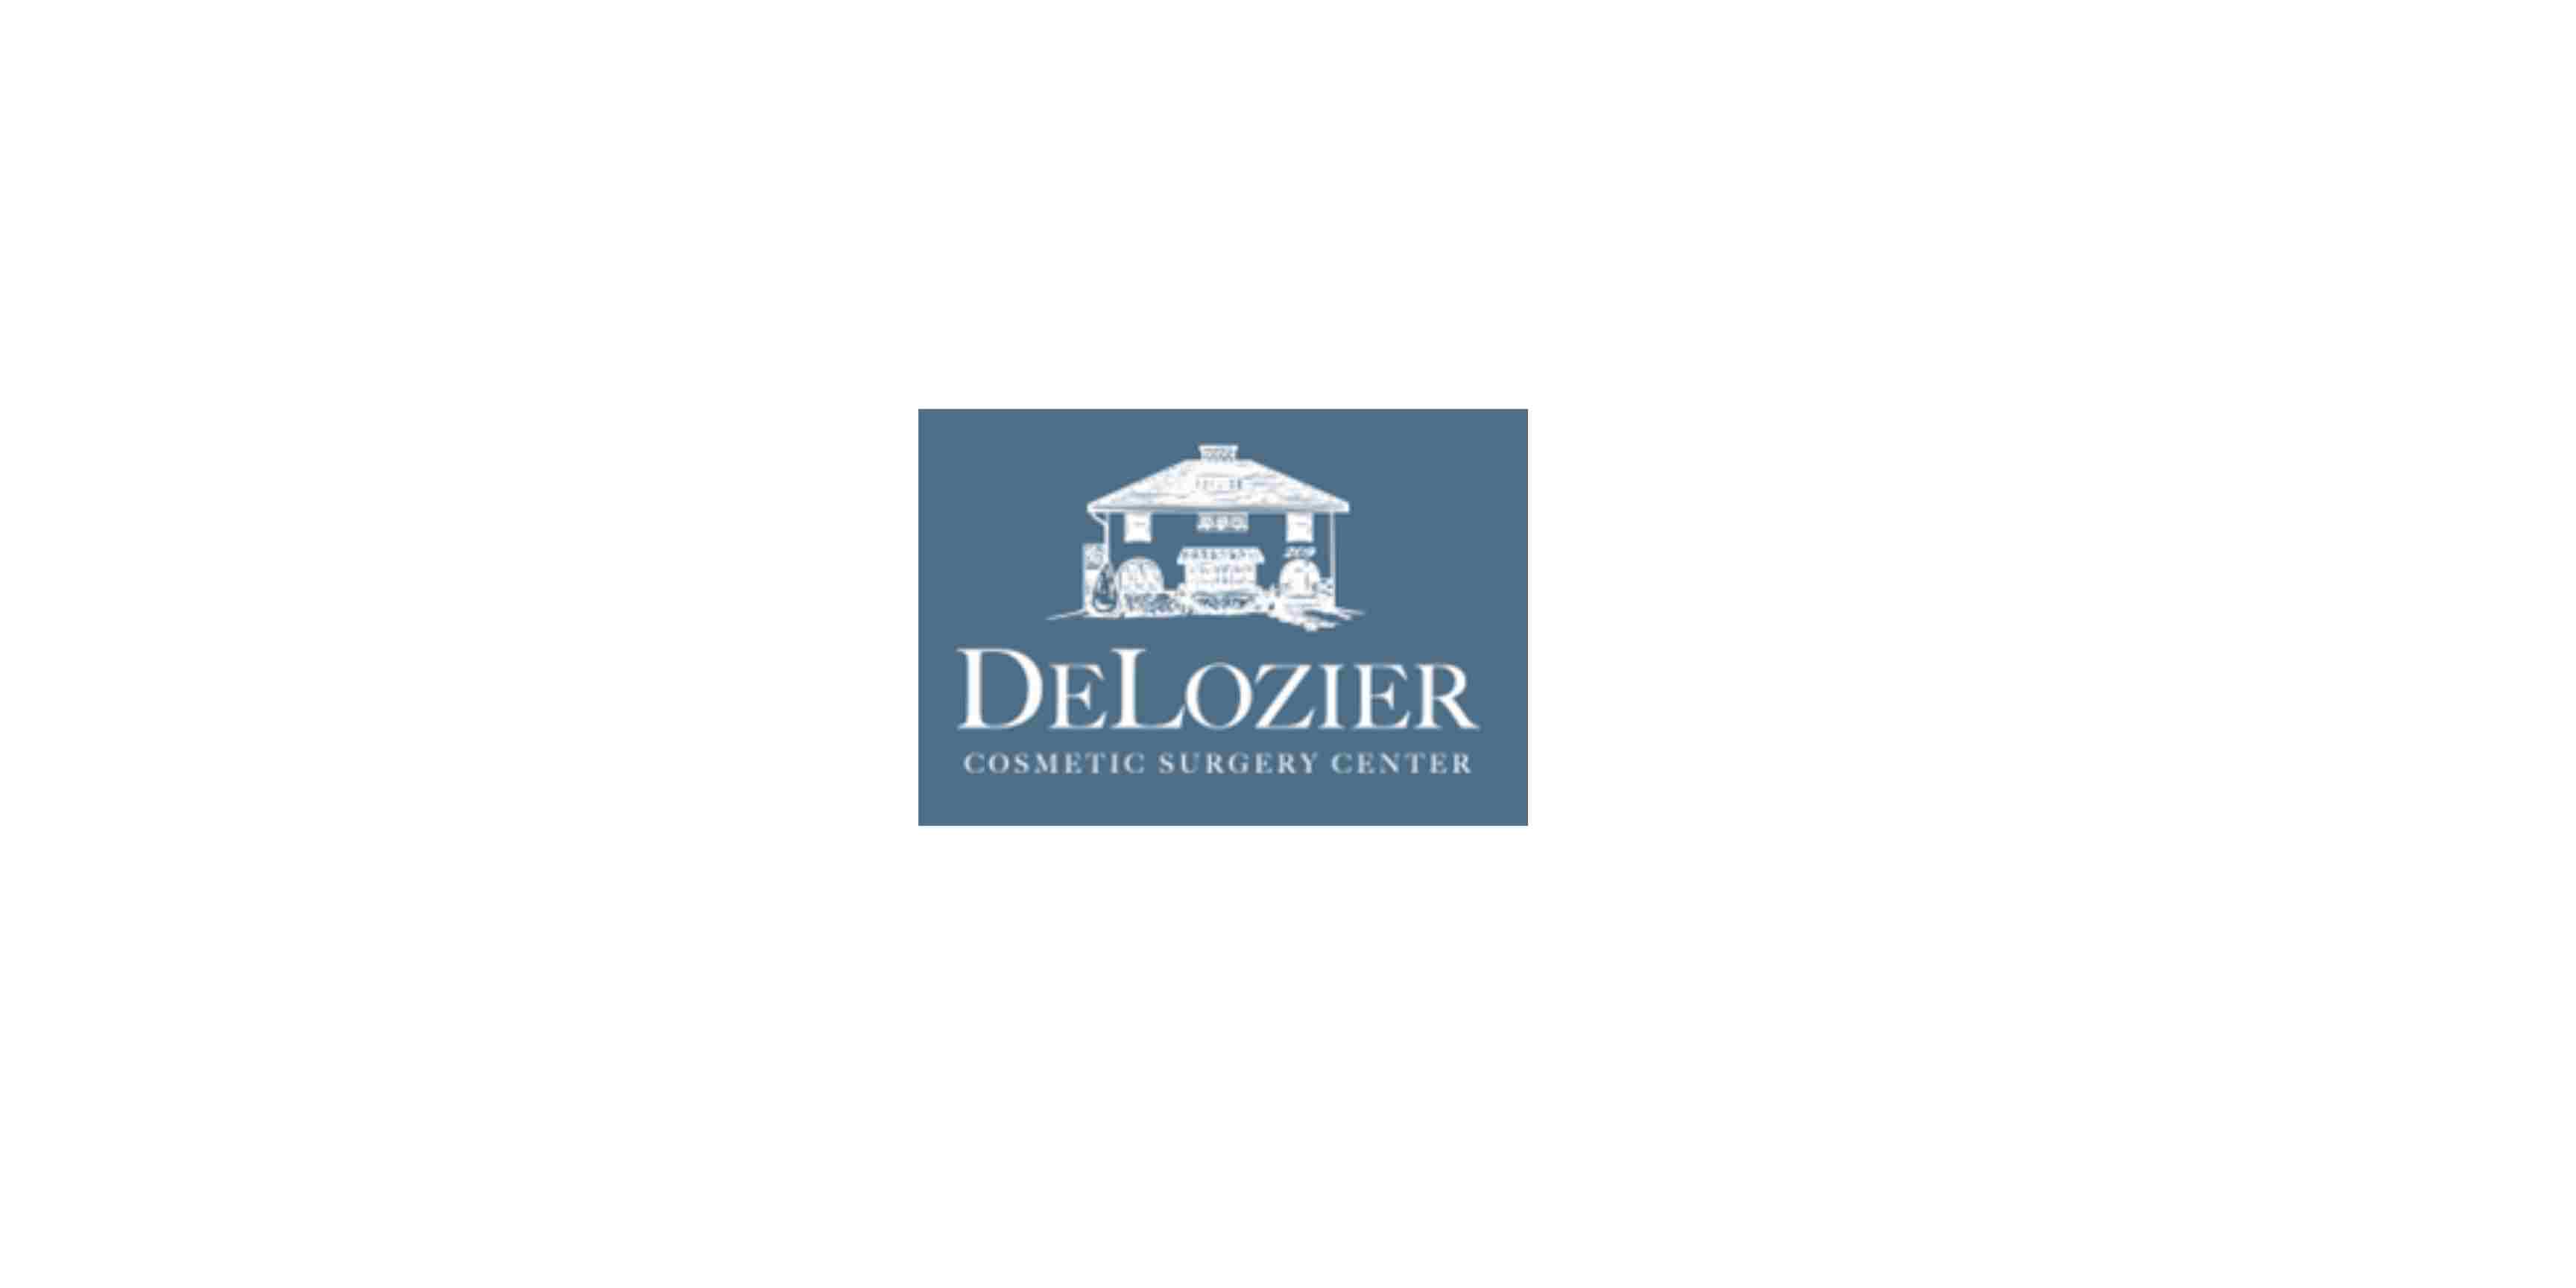 DeLozier Cosmetic Surgery Center | 209 23rd Ave N, Nashville, TN 37203, United States | Phone: (615) 565-9000